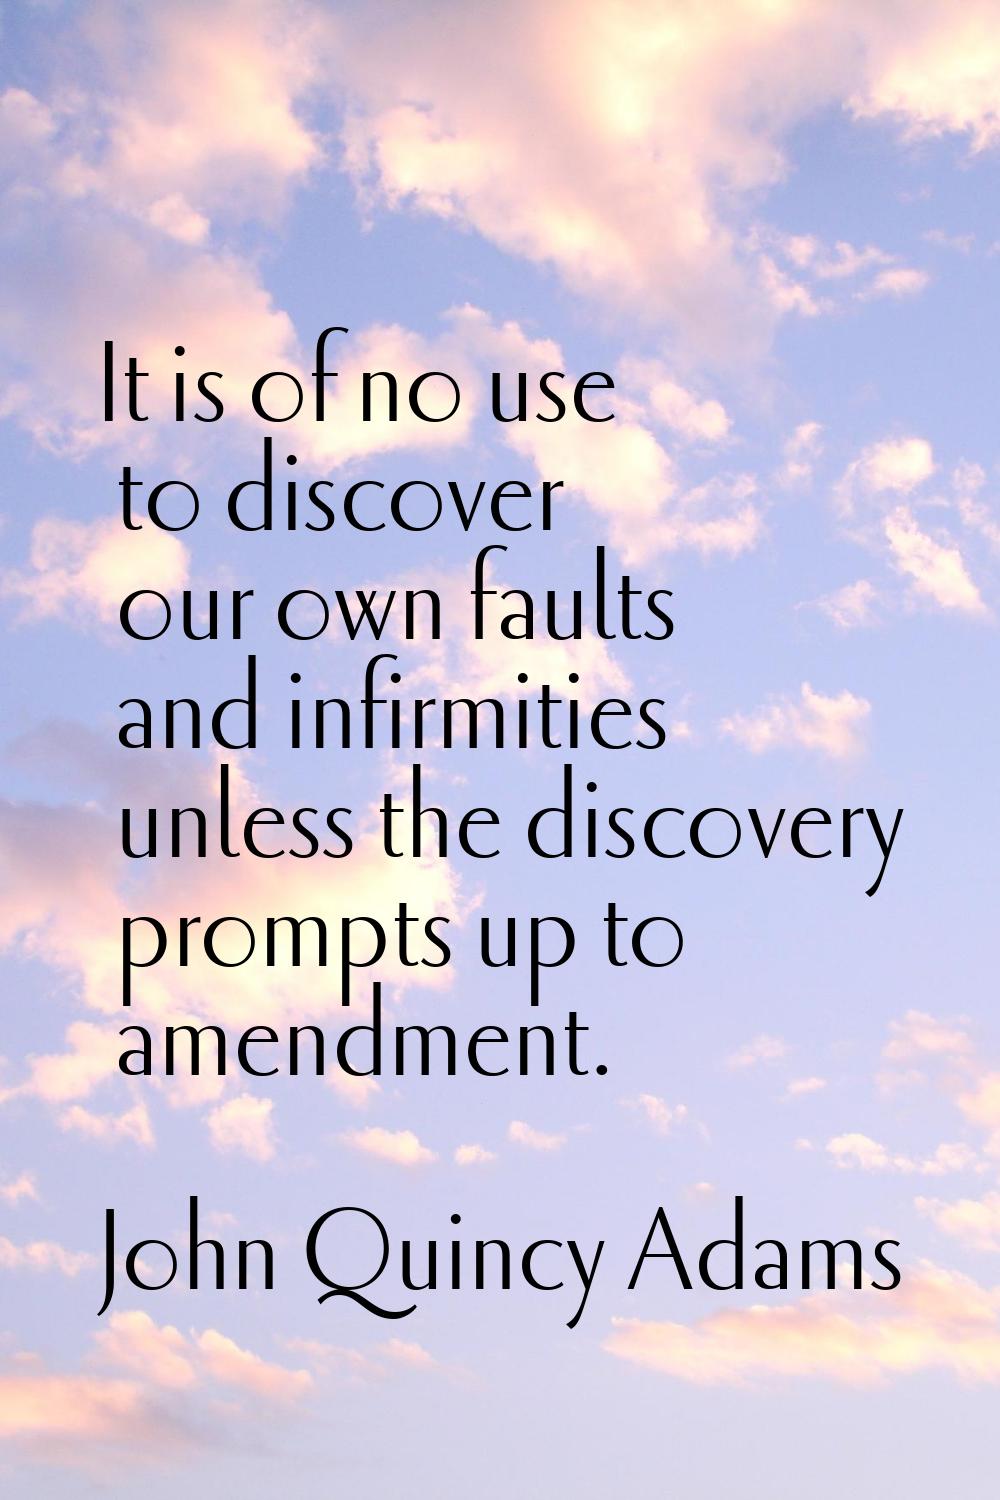 It is of no use to discover our own faults and infirmities unless the discovery prompts up to amend